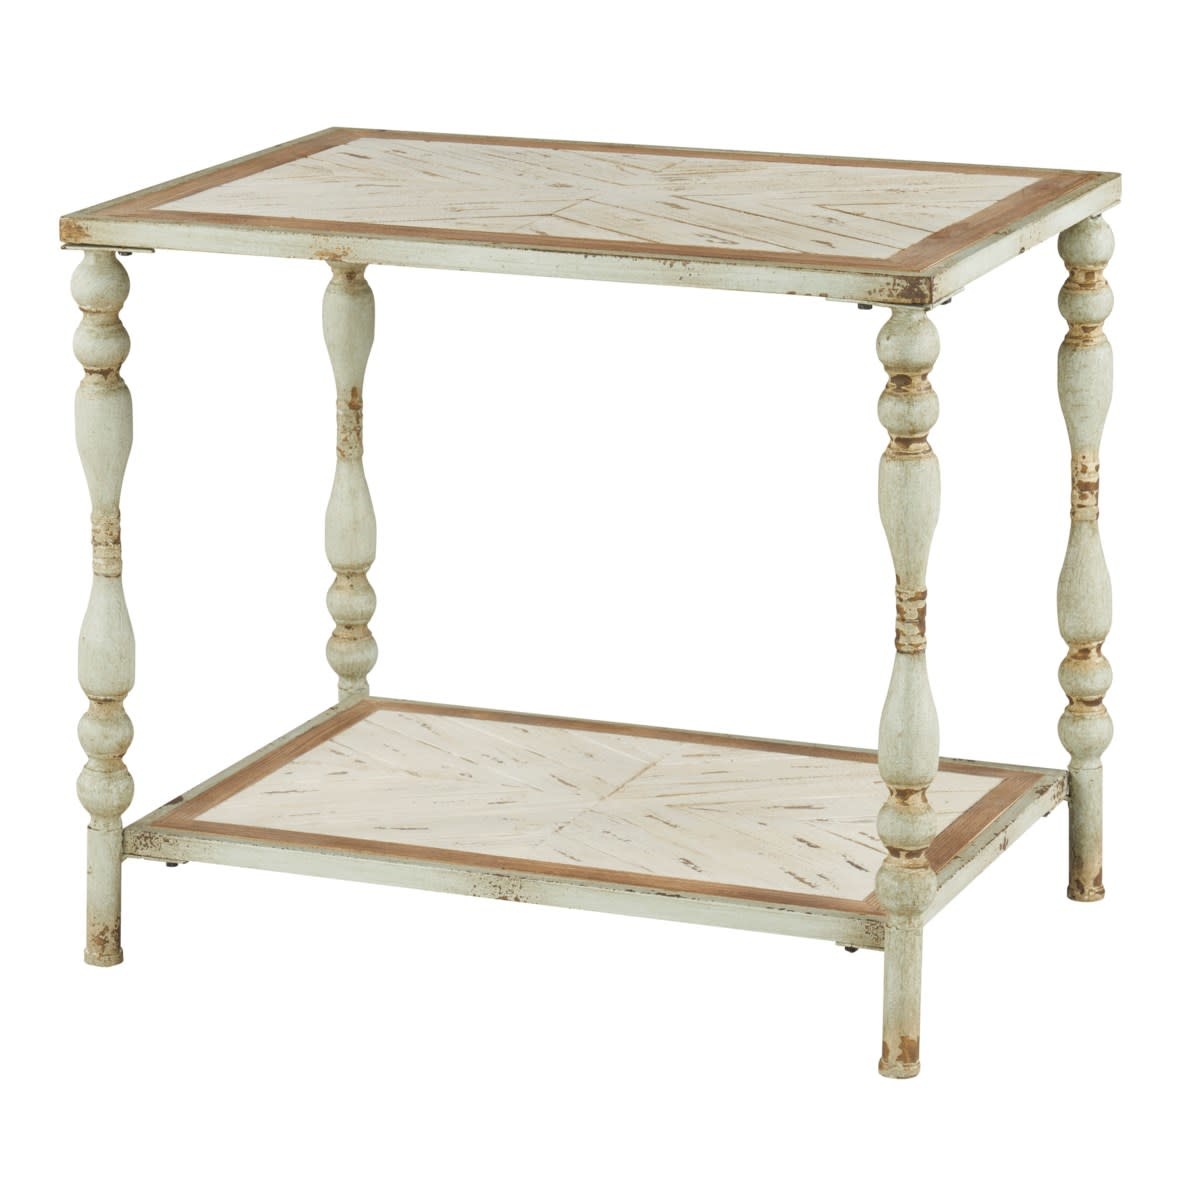 Damon Accent Table, 28 x 20 x 24 Furniture Available for Local Delivery or Pick Up